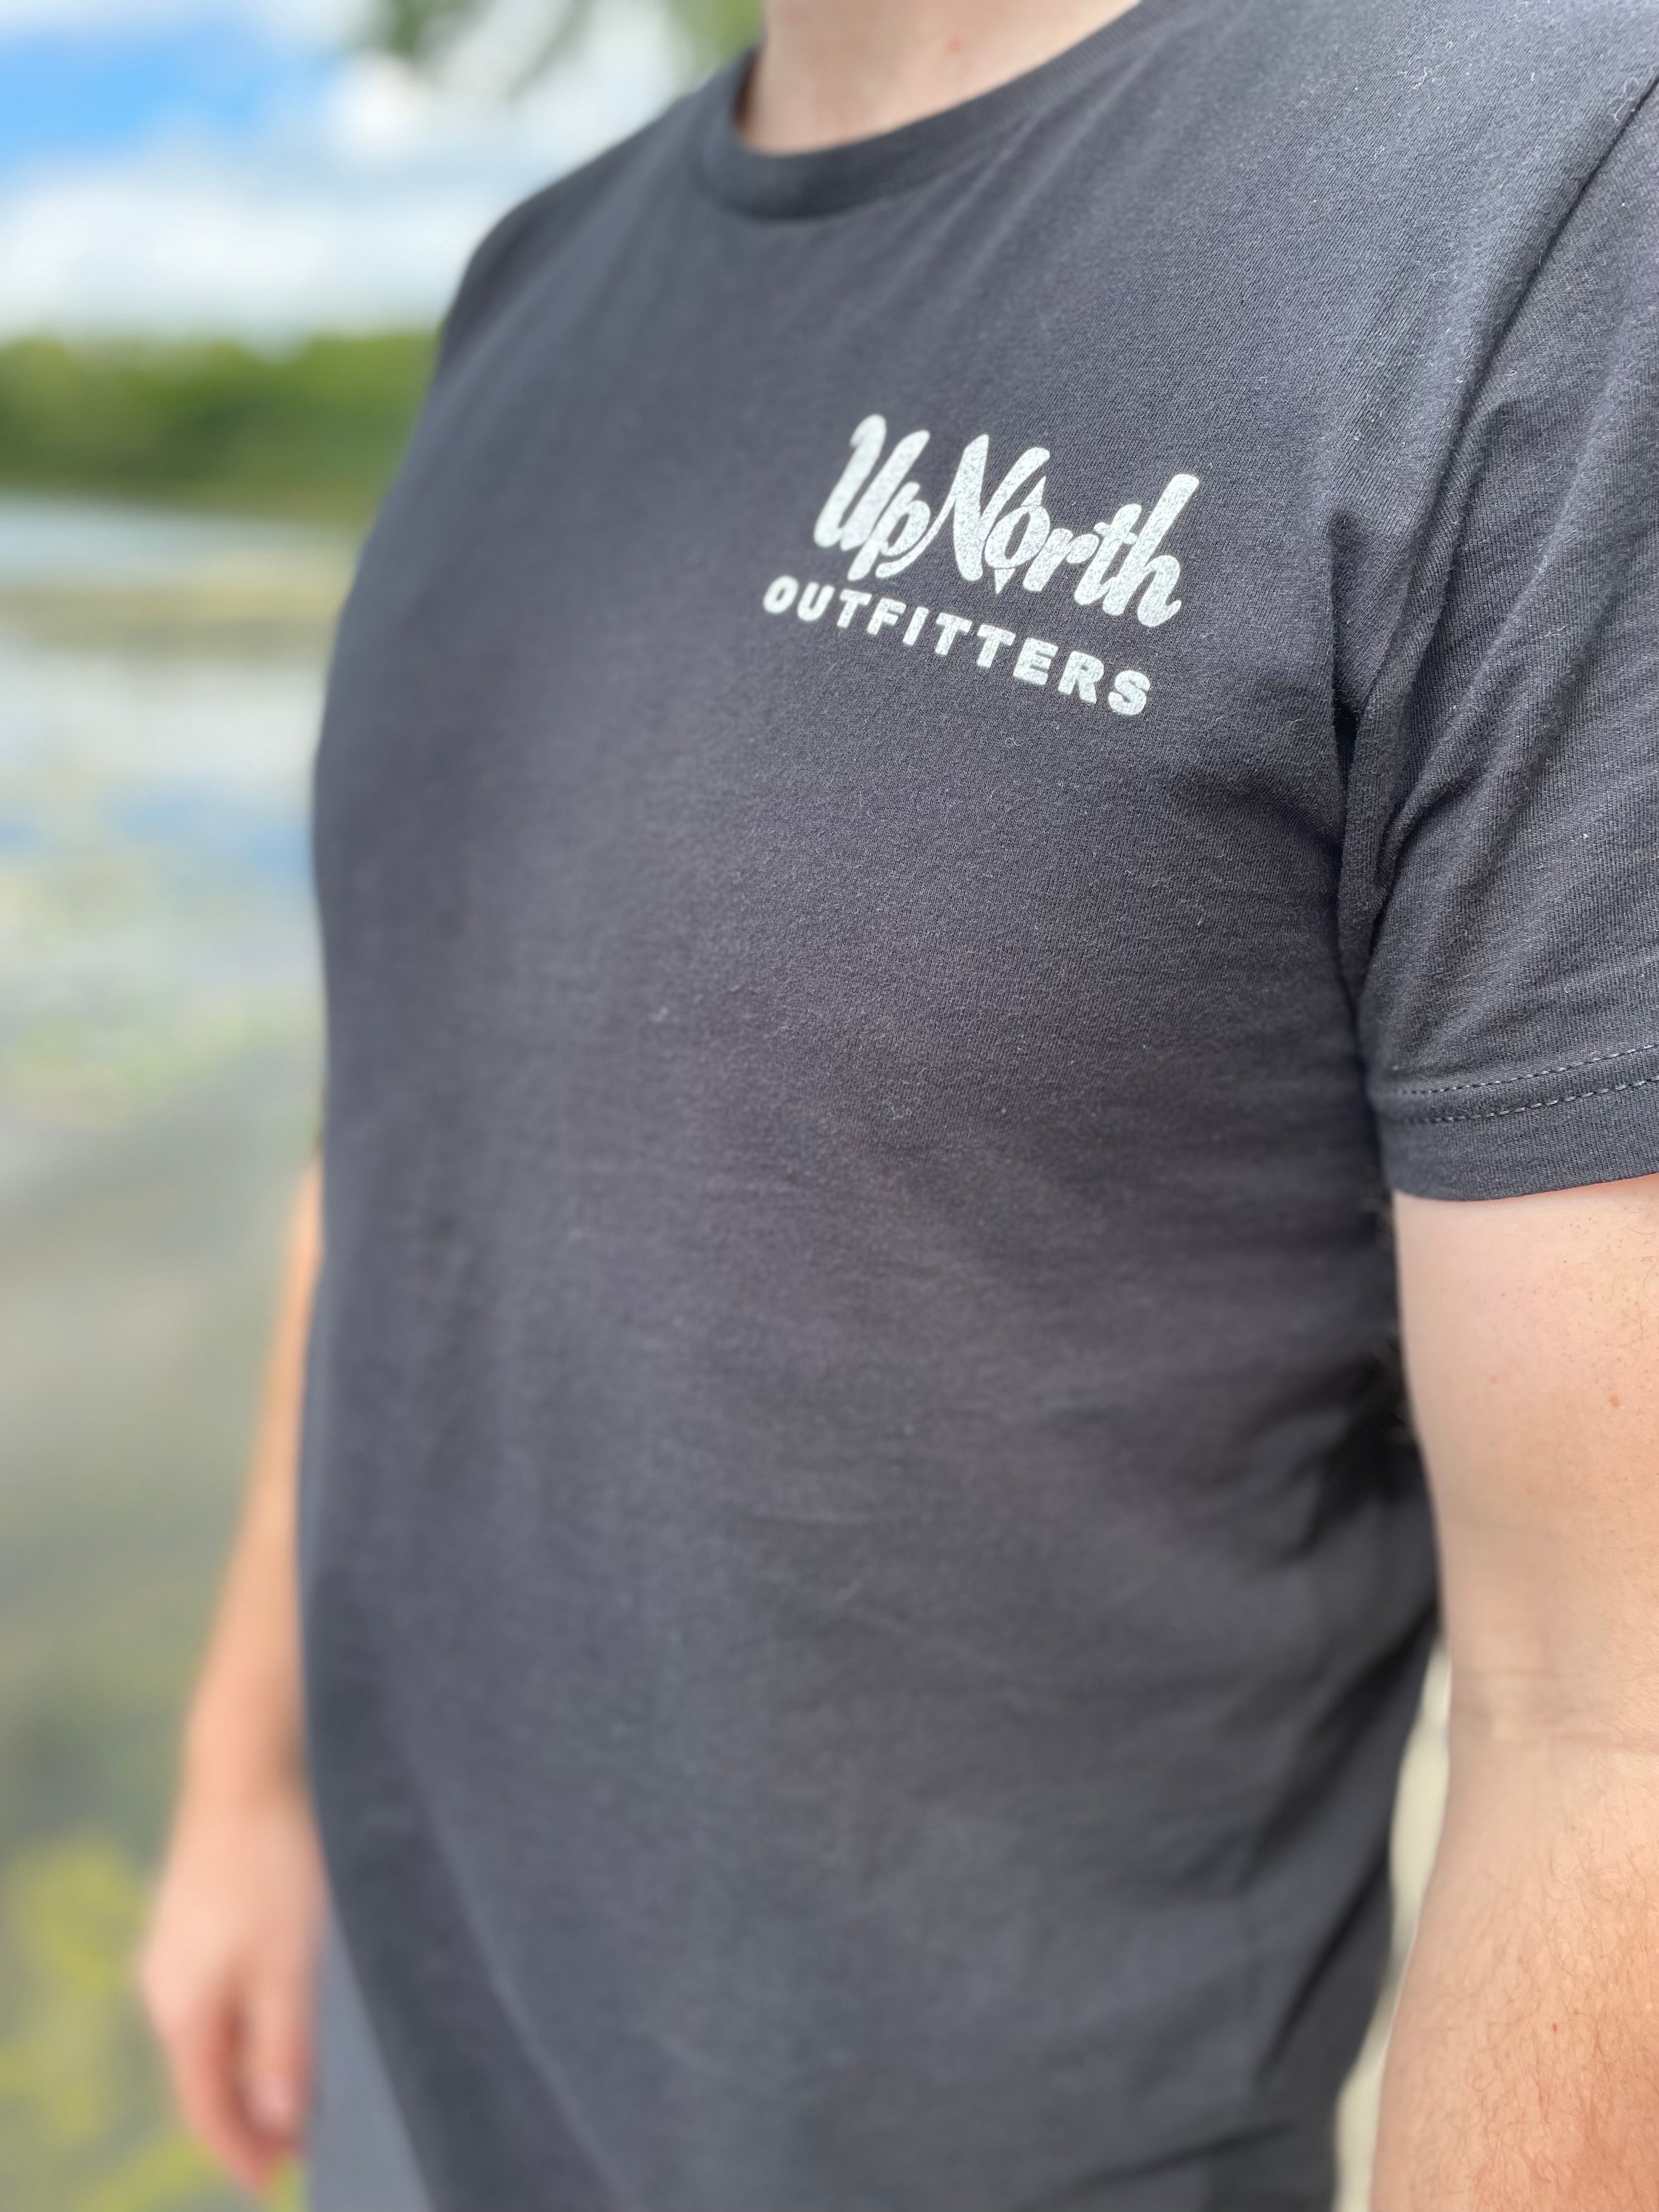 UpNorth Outfitters Camper Tee. Black, Get Hooked Up North Outfitters. Up North Minnesota, Wisconsin, South Dakota UpNorth Up north Outdoors